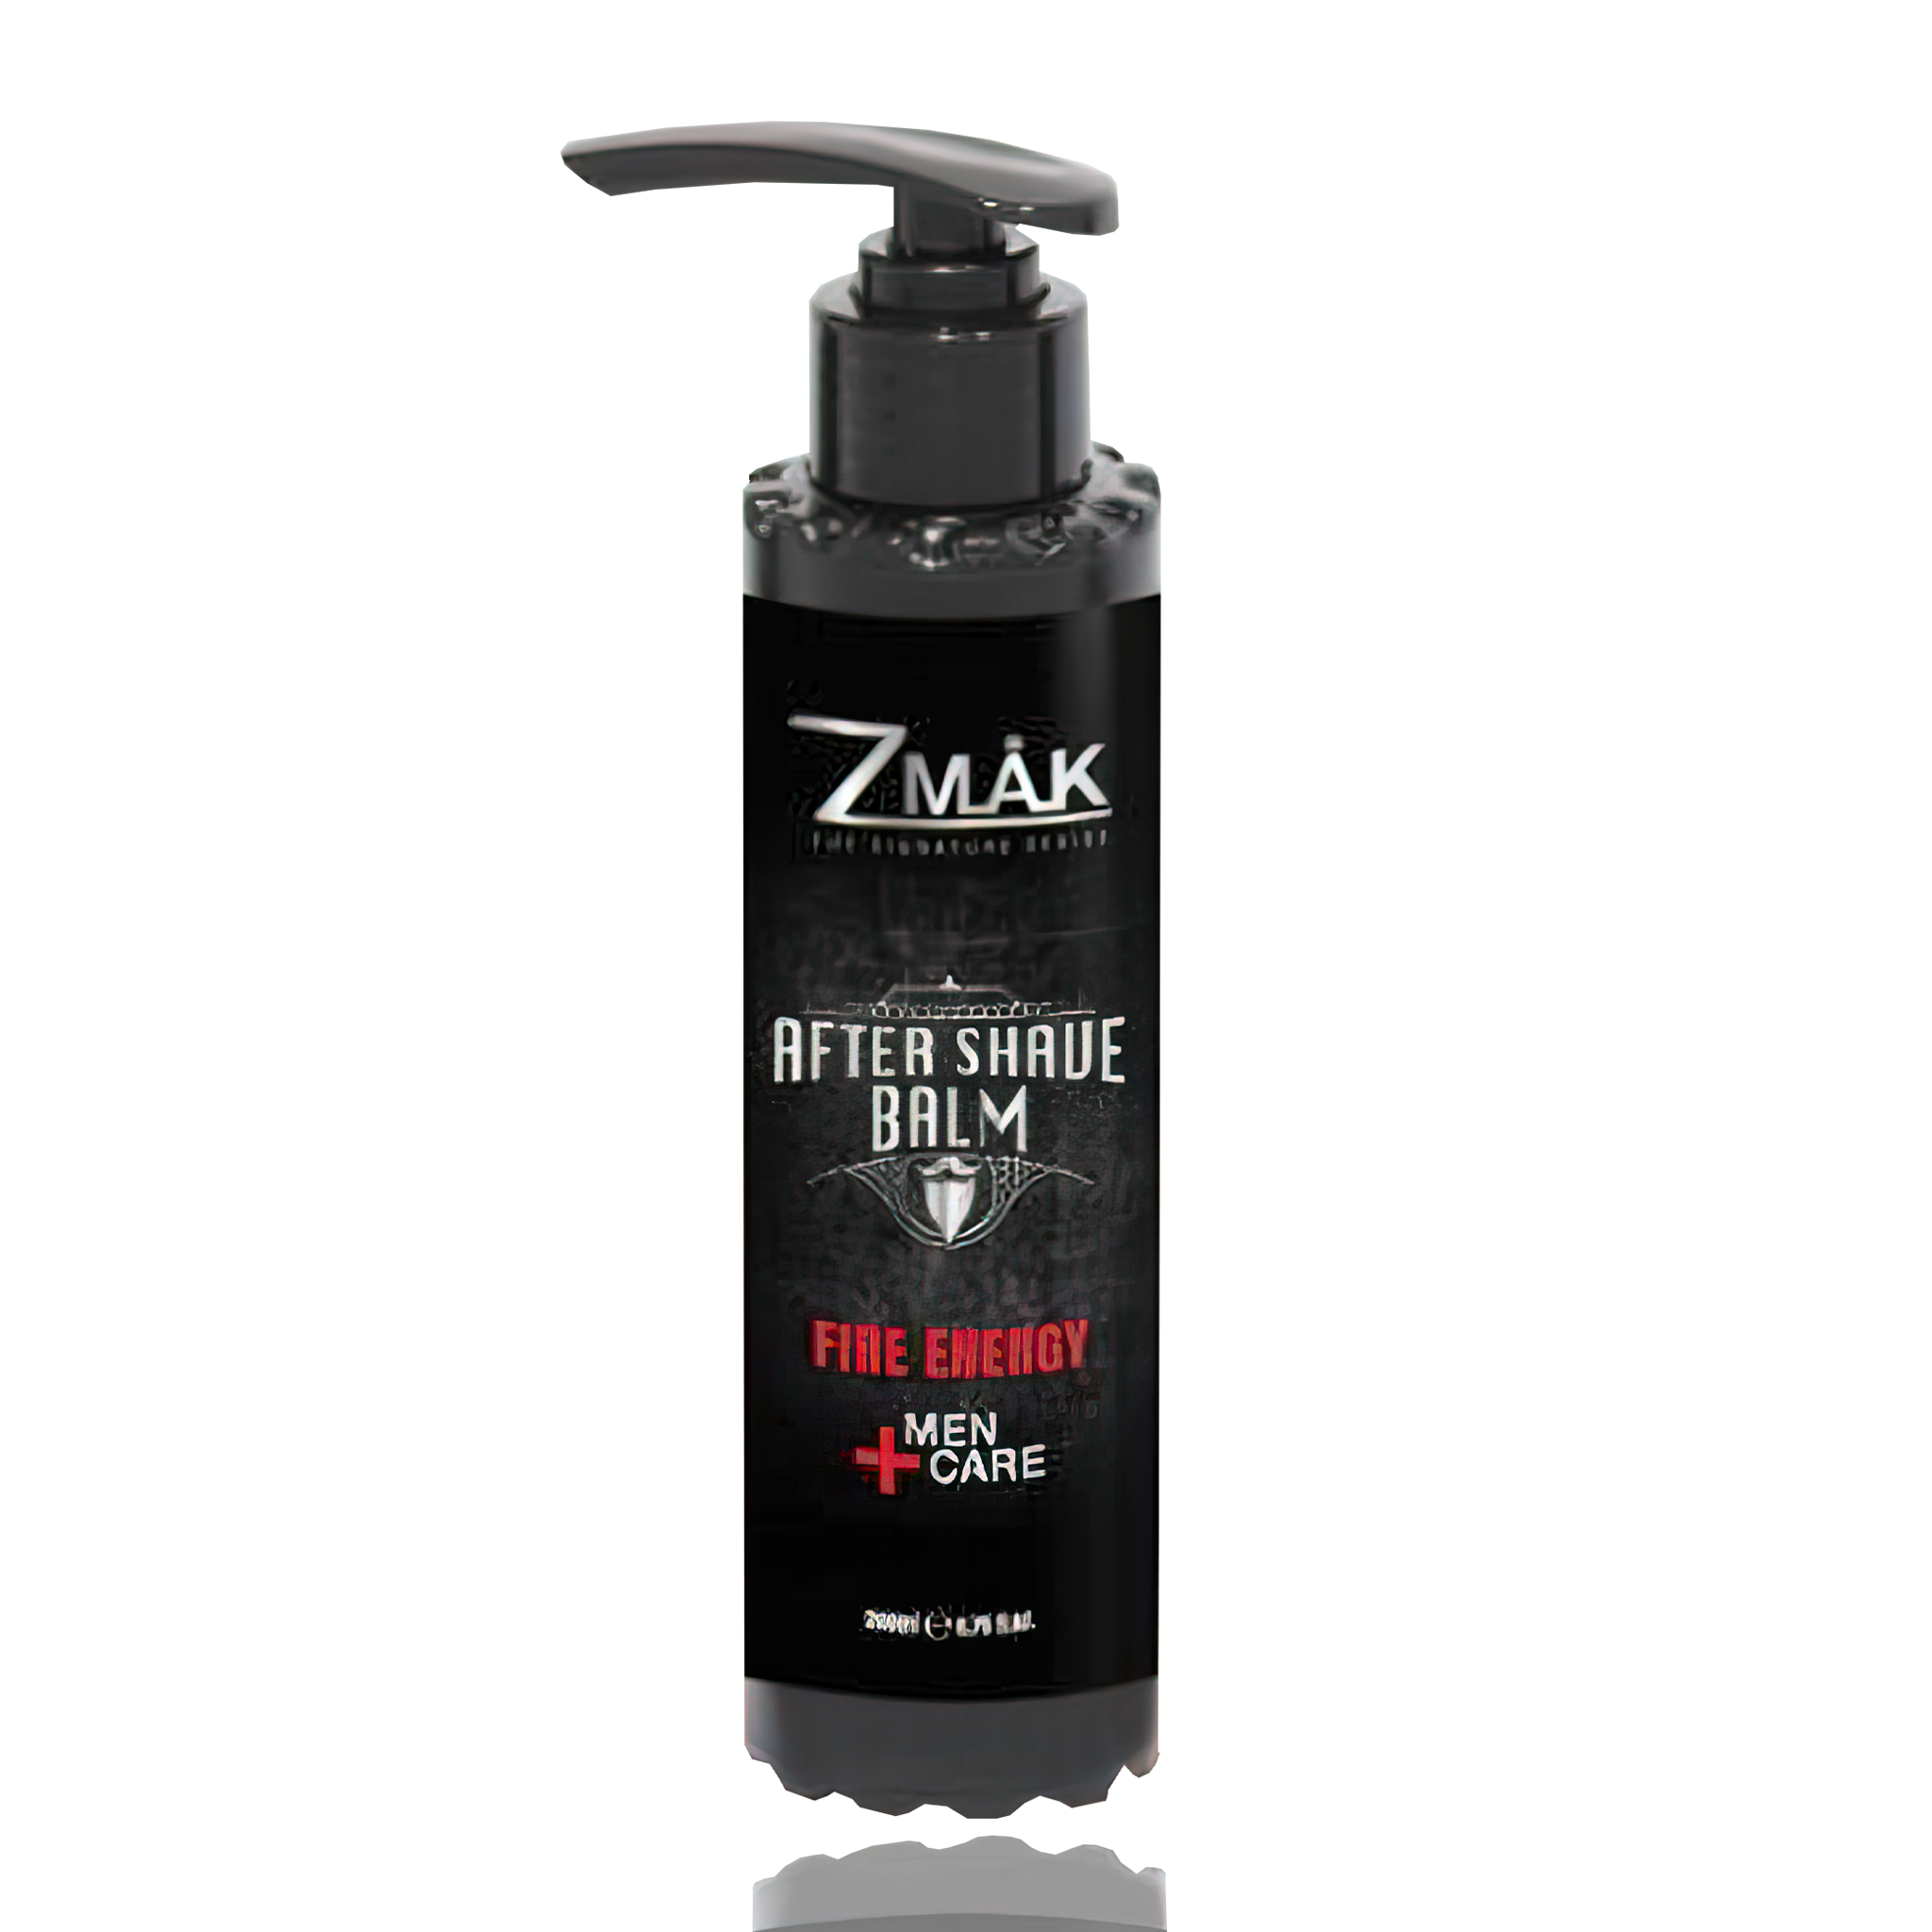 After Shave Balm for Men - Lasts Up to 8 Hours - Reduces Signs of Aging - Clinically Tested for Sensitive Skin - Fire Energy - 6.75 fl oz. - ZMAK The Signature Series